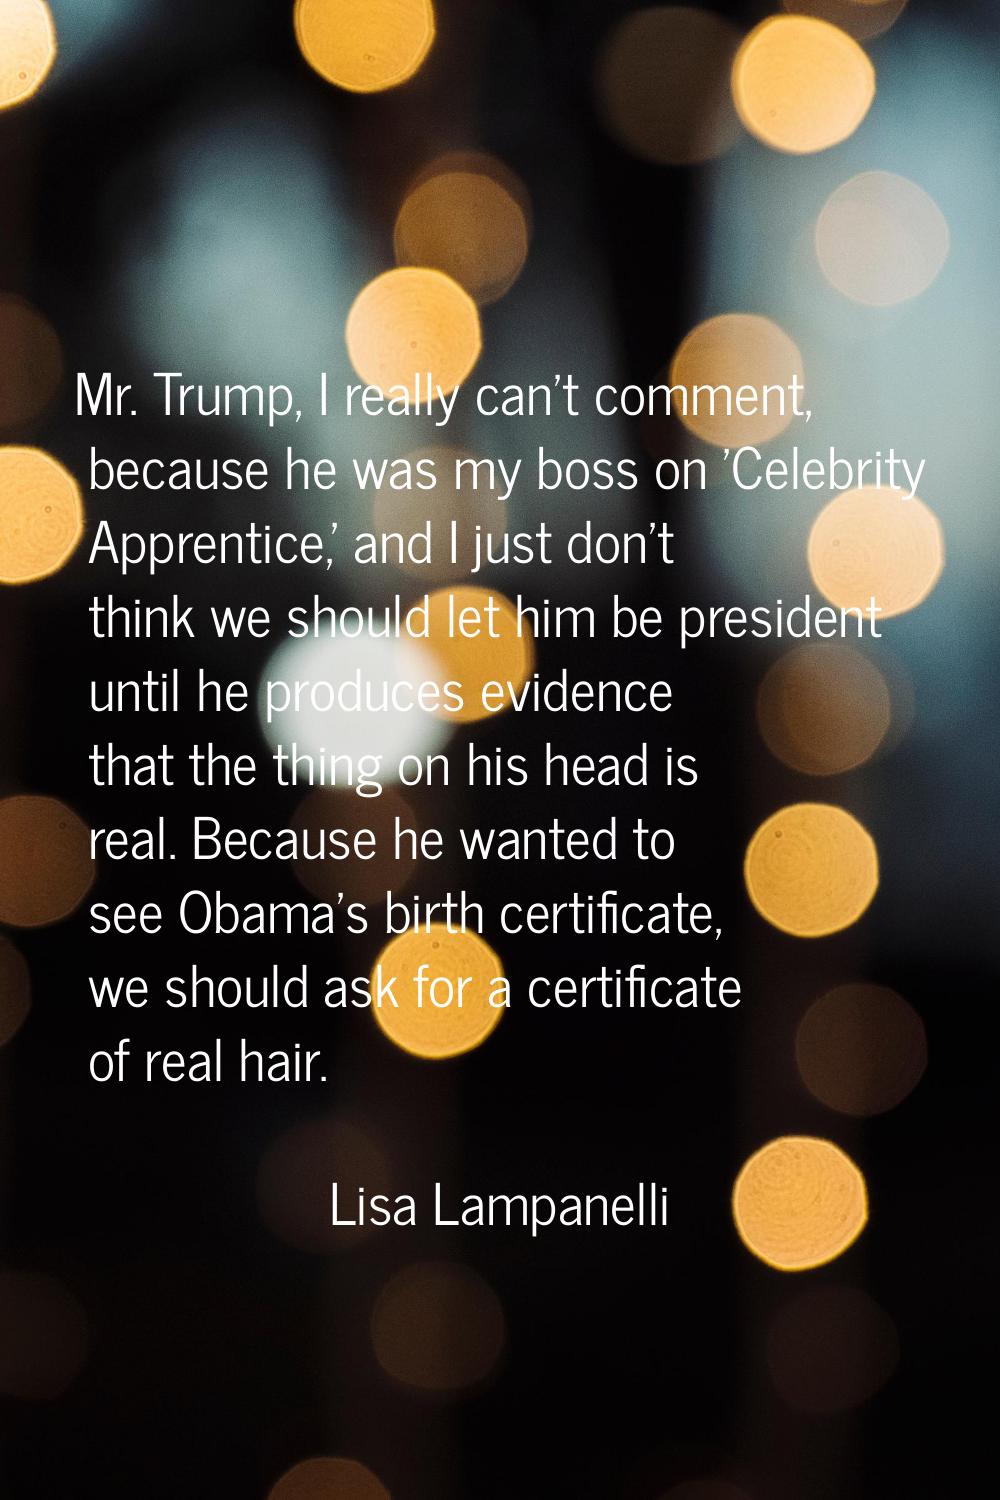 Mr. Trump, I really can't comment, because he was my boss on 'Celebrity Apprentice,' and I just don